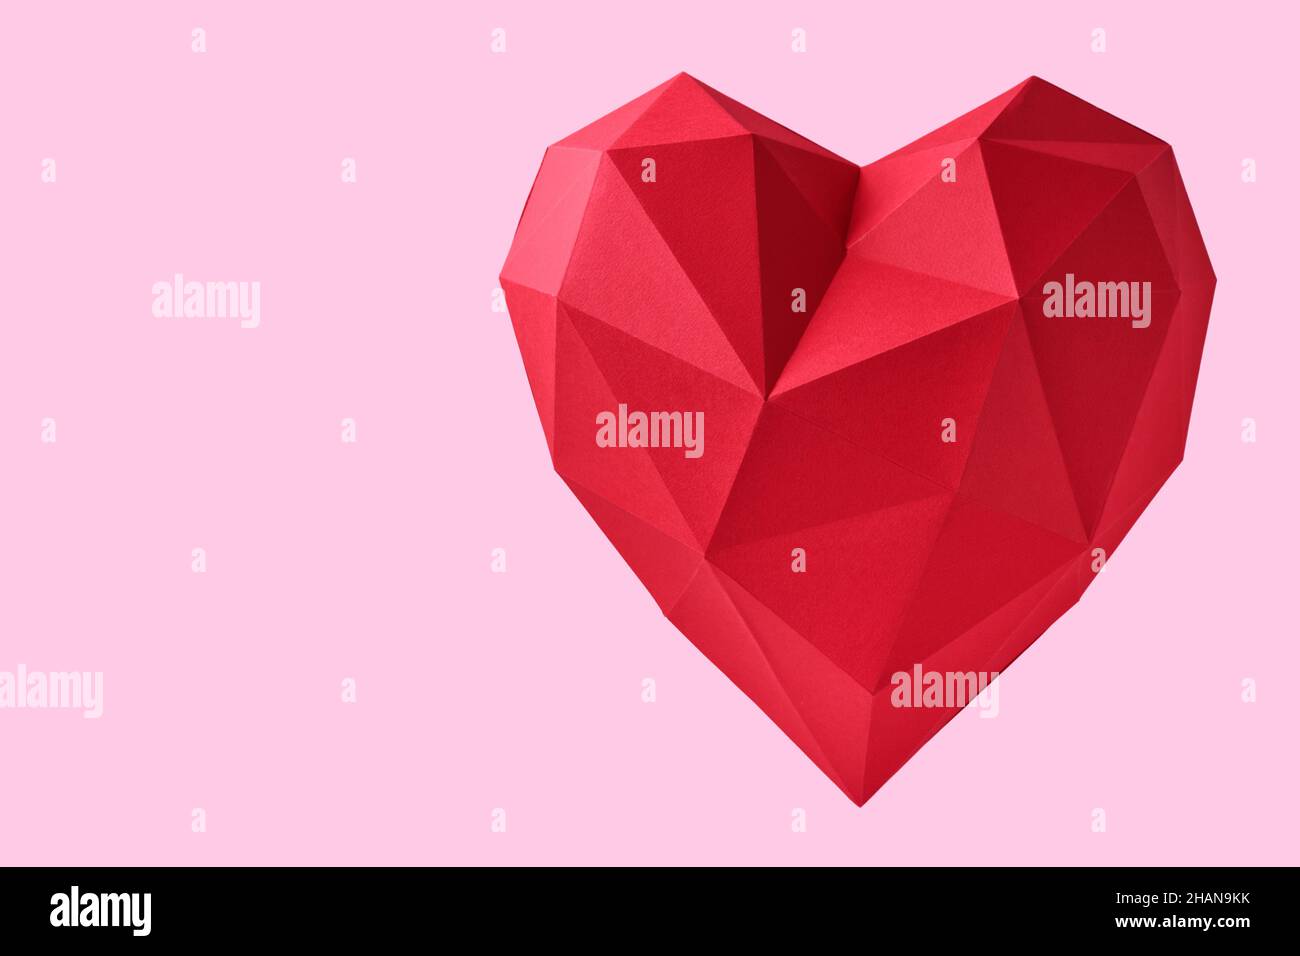 Red paper hearth isolated on pink background. Red polygonal paper heart for Valentine's day or any other Love invitation cards. Top view, copy space. Stock Photo